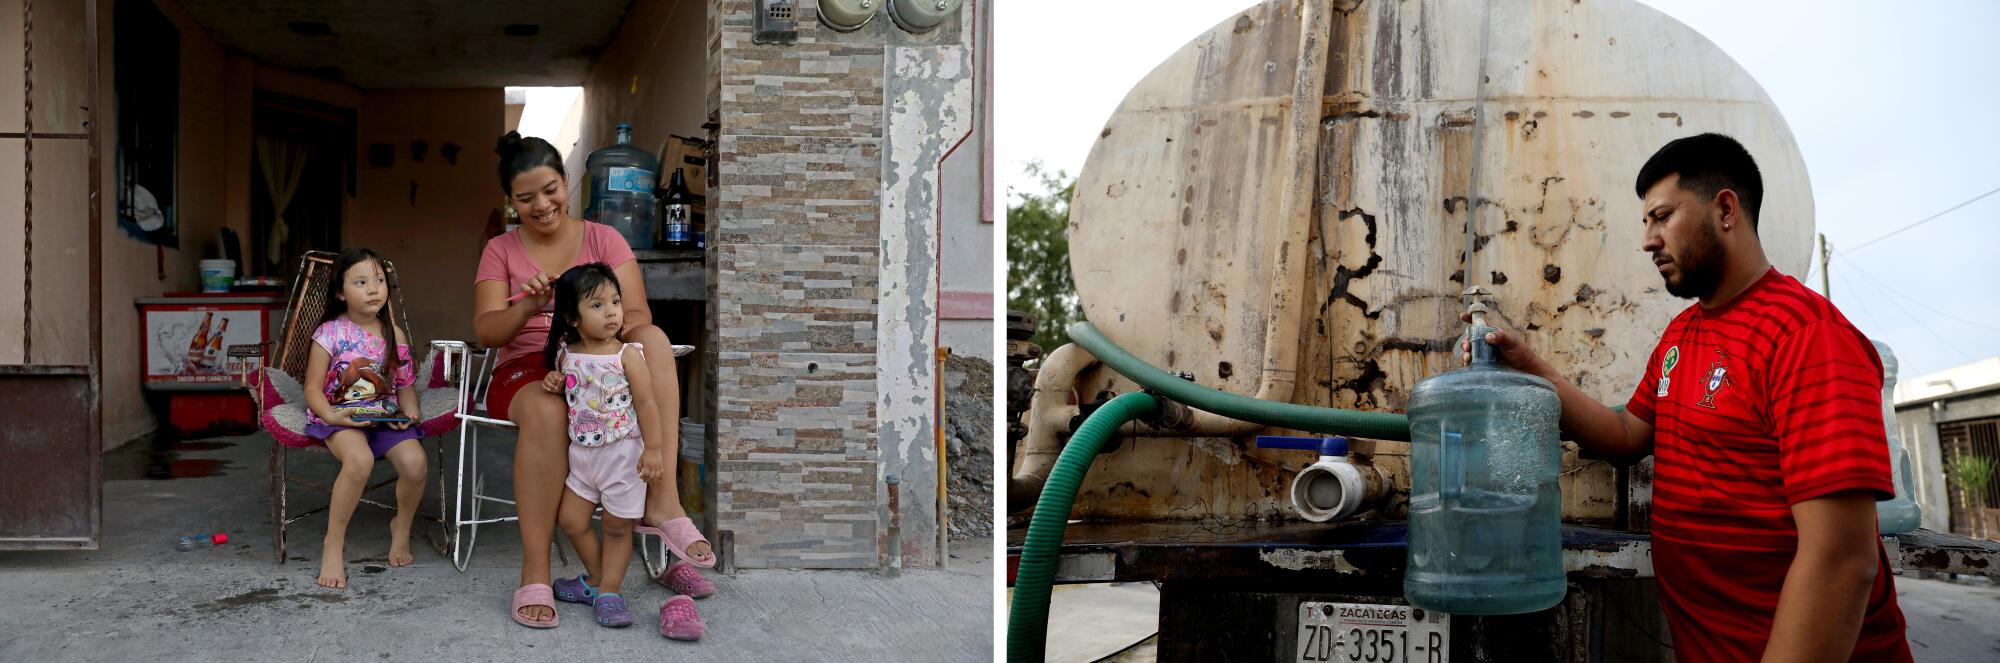 A woman brushes children's hair in a photo. A man fills a water bottle from a tanker truck in another photo.